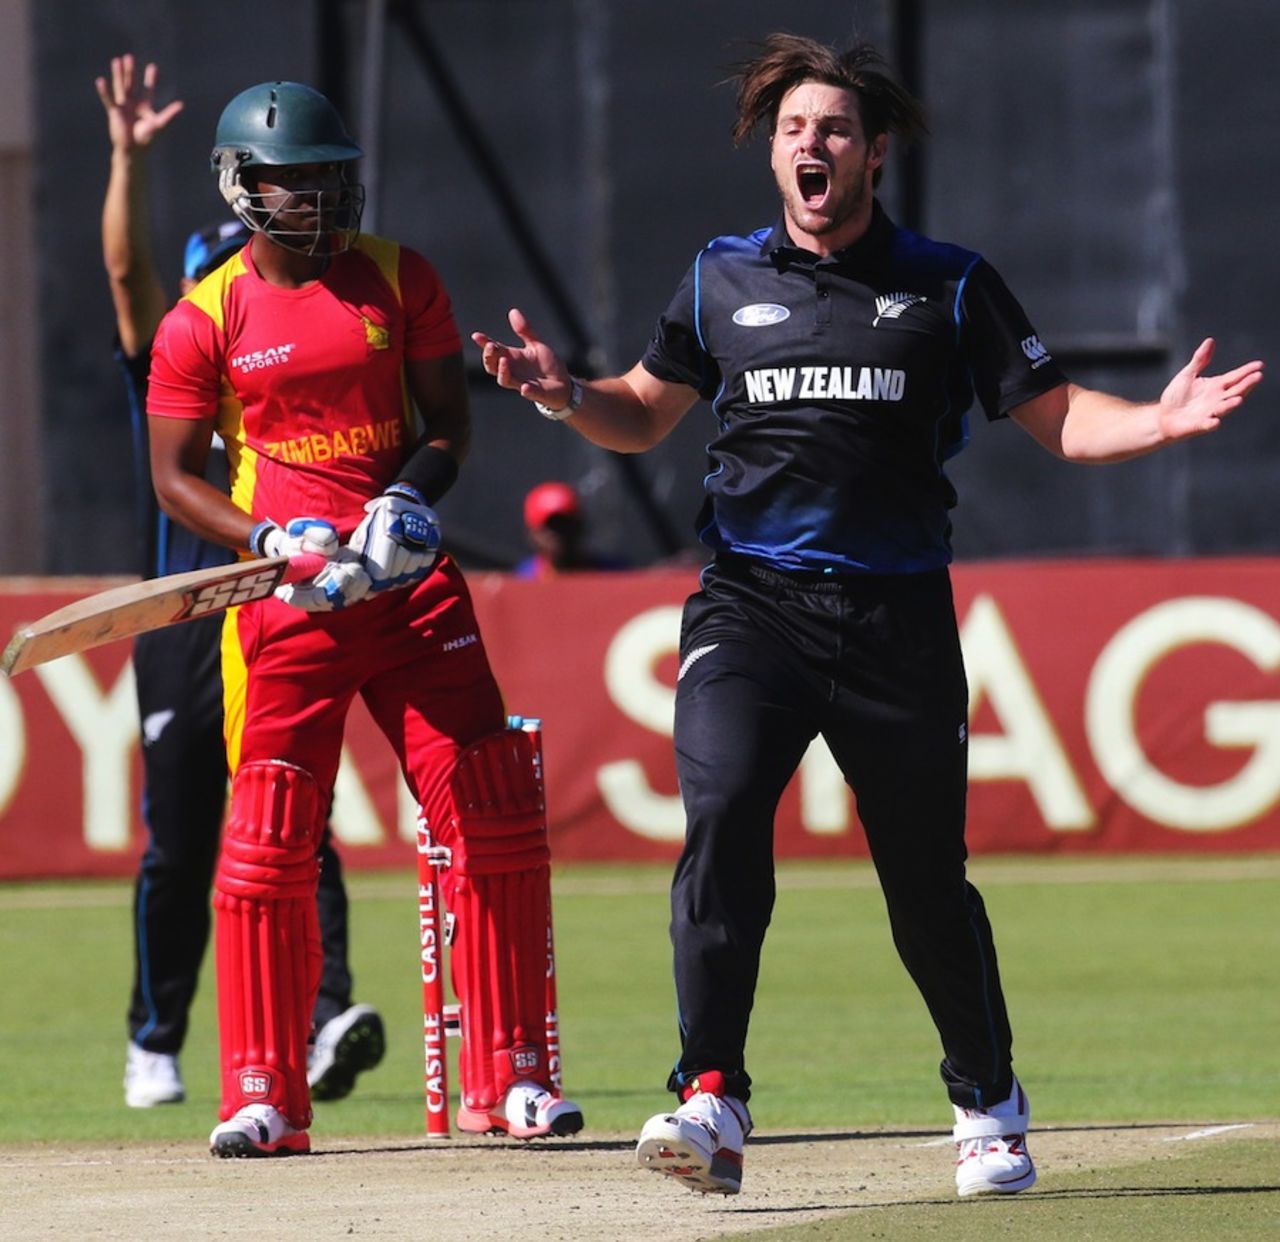 Mitchell McClenaghan dismissed Hamilton Masakadza during a hostile first spell, Zimbabwe v New Zealand, 2nd ODI, Harare, August 4, 2015